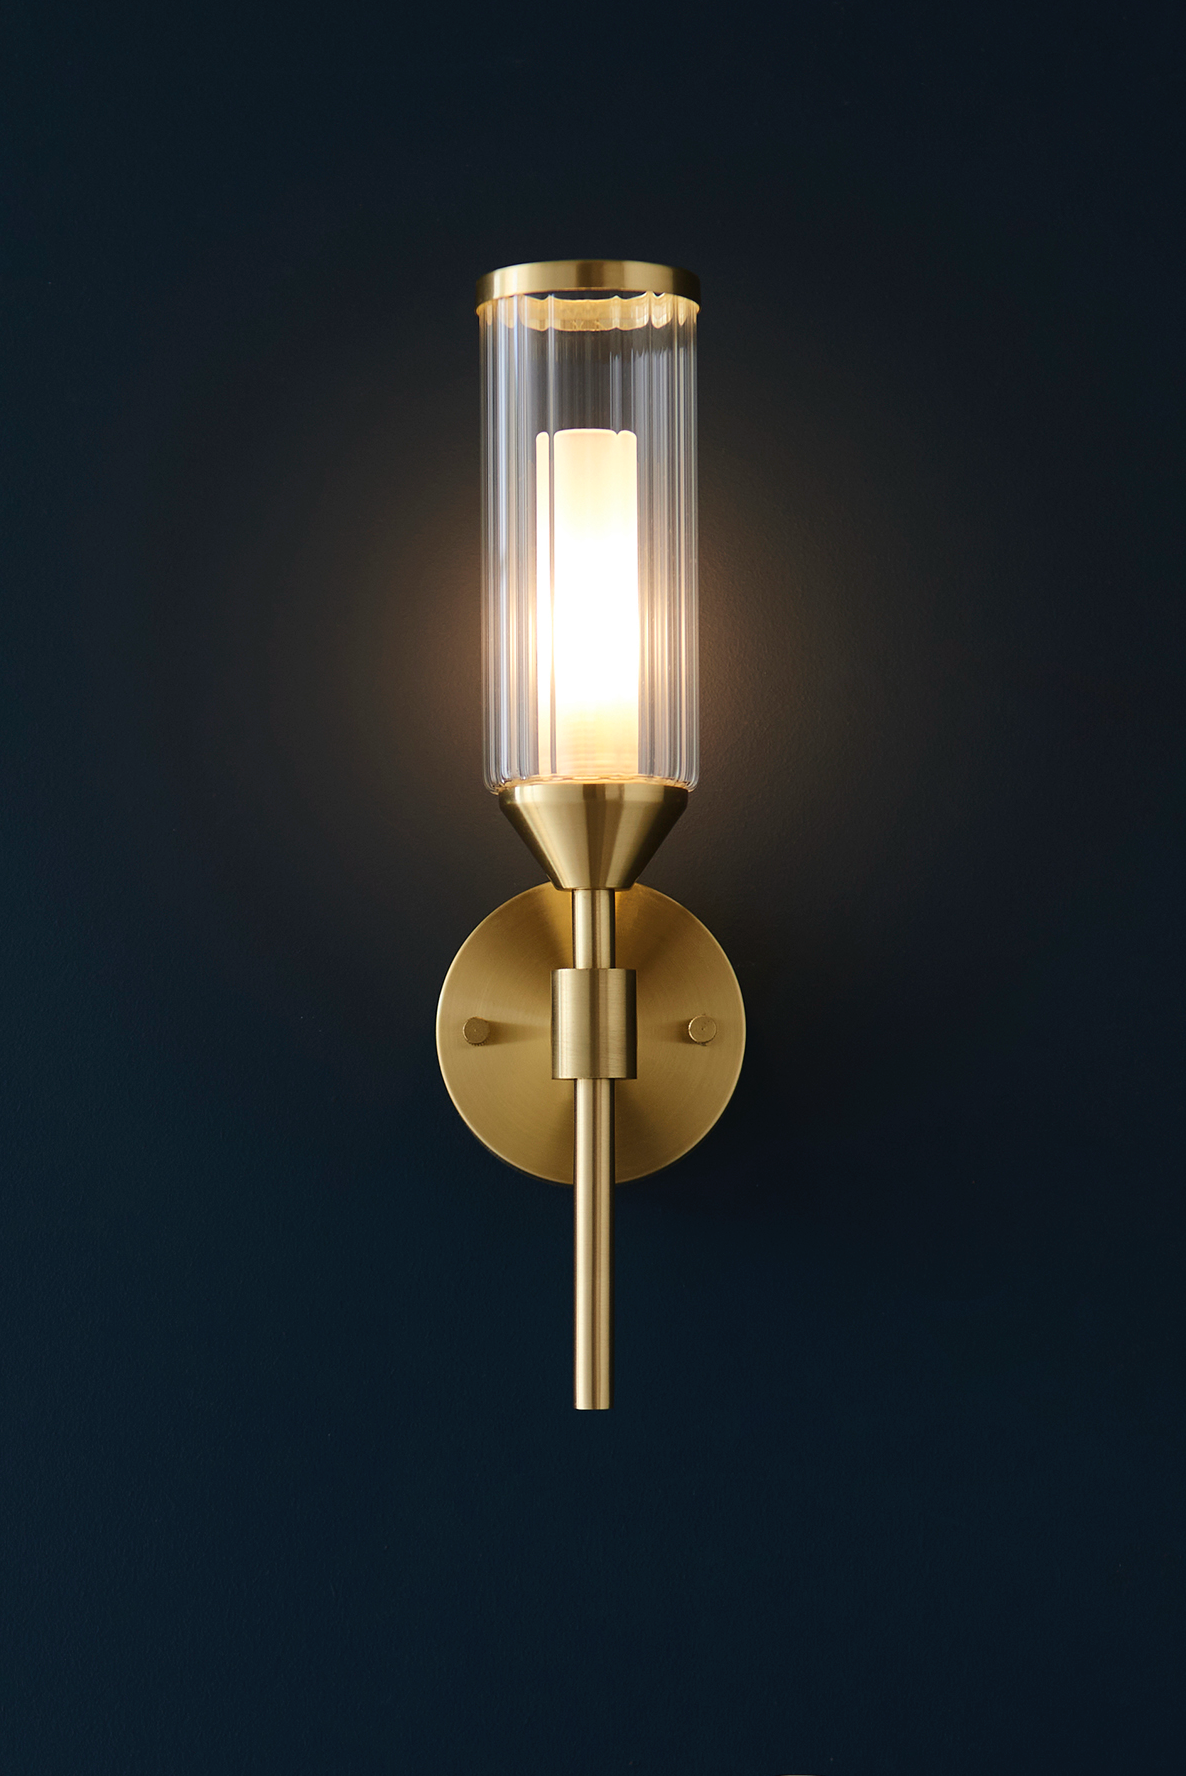 Frosted Glass & Satin Brass Wall Light - ID